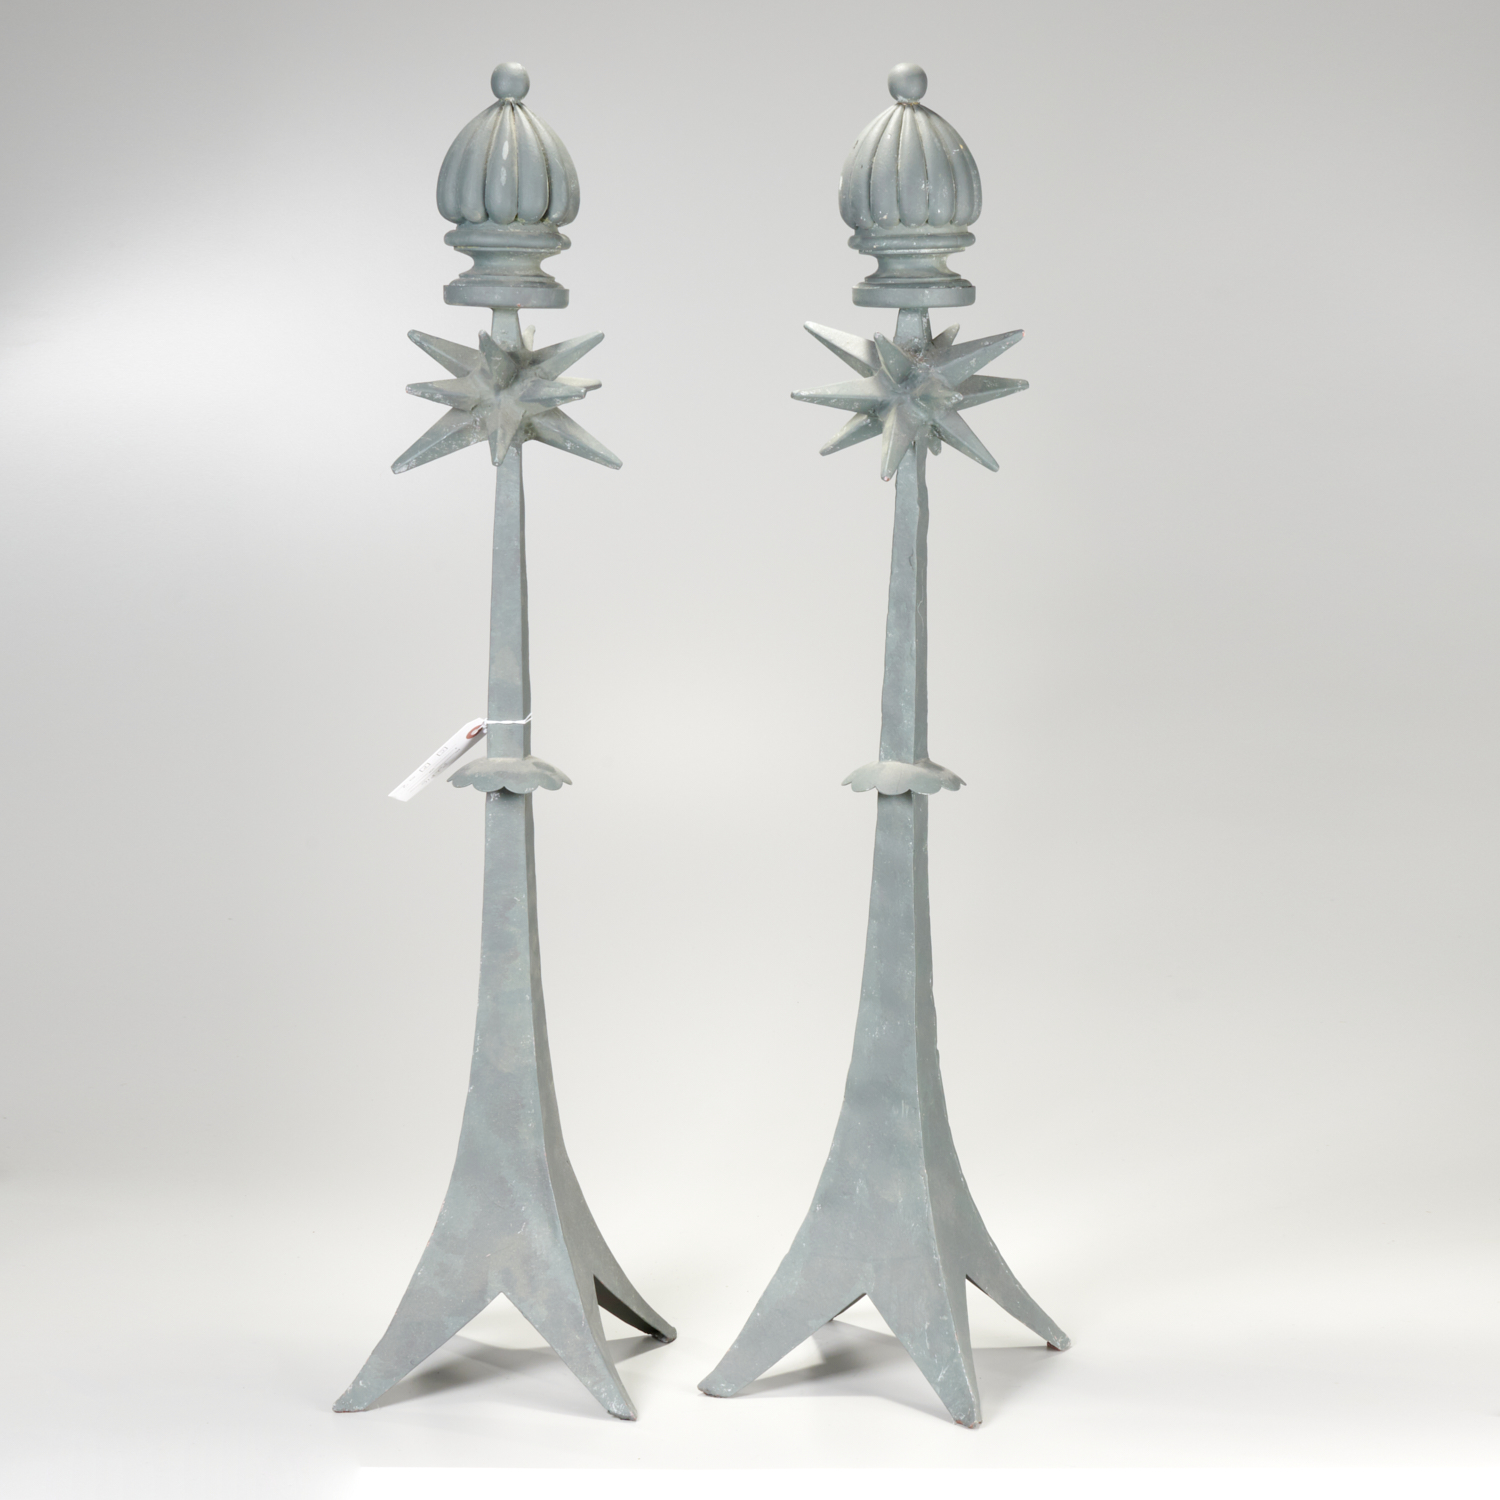 PAIR FRENCH DECORATIVE SPIRE ORNAMENTS 2ce5fd